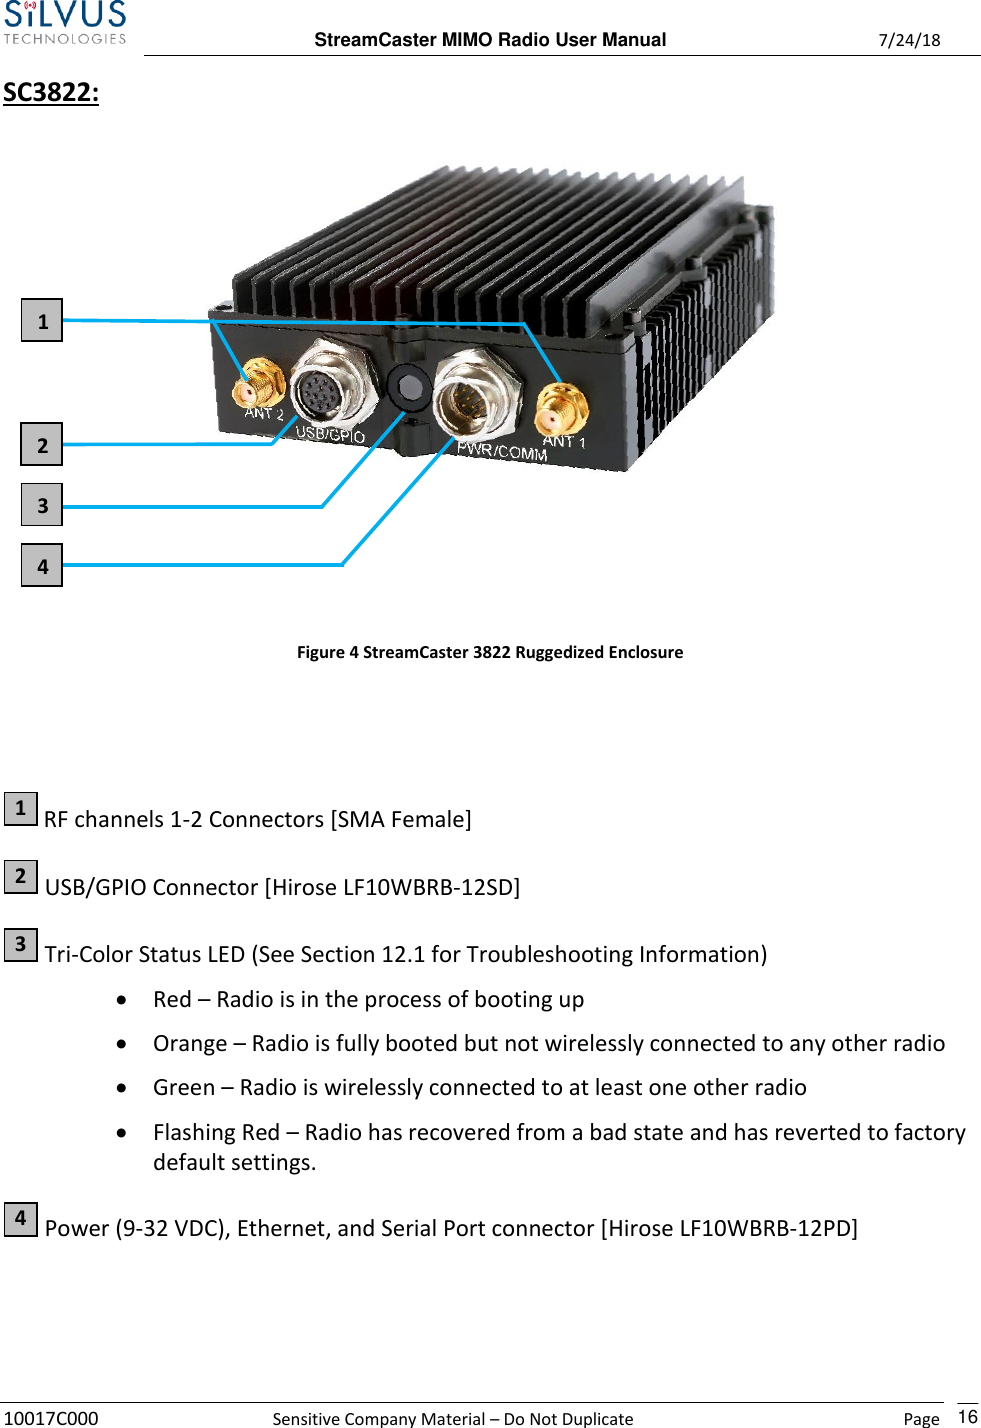  StreamCaster MIMO Radio User Manual  7/24/18 10017C000  Sensitive Company Material – Do Not Duplicate    Page    16 SC3822:     Figure 4 StreamCaster 3822 Ruggedized Enclosure    RF channels 1-2 Connectors [SMA Female]  USB/GPIO Connector [Hirose LF10WBRB-12SD]  Tri-Color Status LED (See Section 12.1 for Troubleshooting Information) • Red – Radio is in the process of booting up • Orange – Radio is fully booted but not wirelessly connected to any other radio • Green – Radio is wirelessly connected to at least one other radio • Flashing Red – Radio has recovered from a bad state and has reverted to factory default settings.  Power (9-32 VDC), Ethernet, and Serial Port connector [Hirose LF10WBRB-12PD] 1 2 3 4 2 1 3 4 